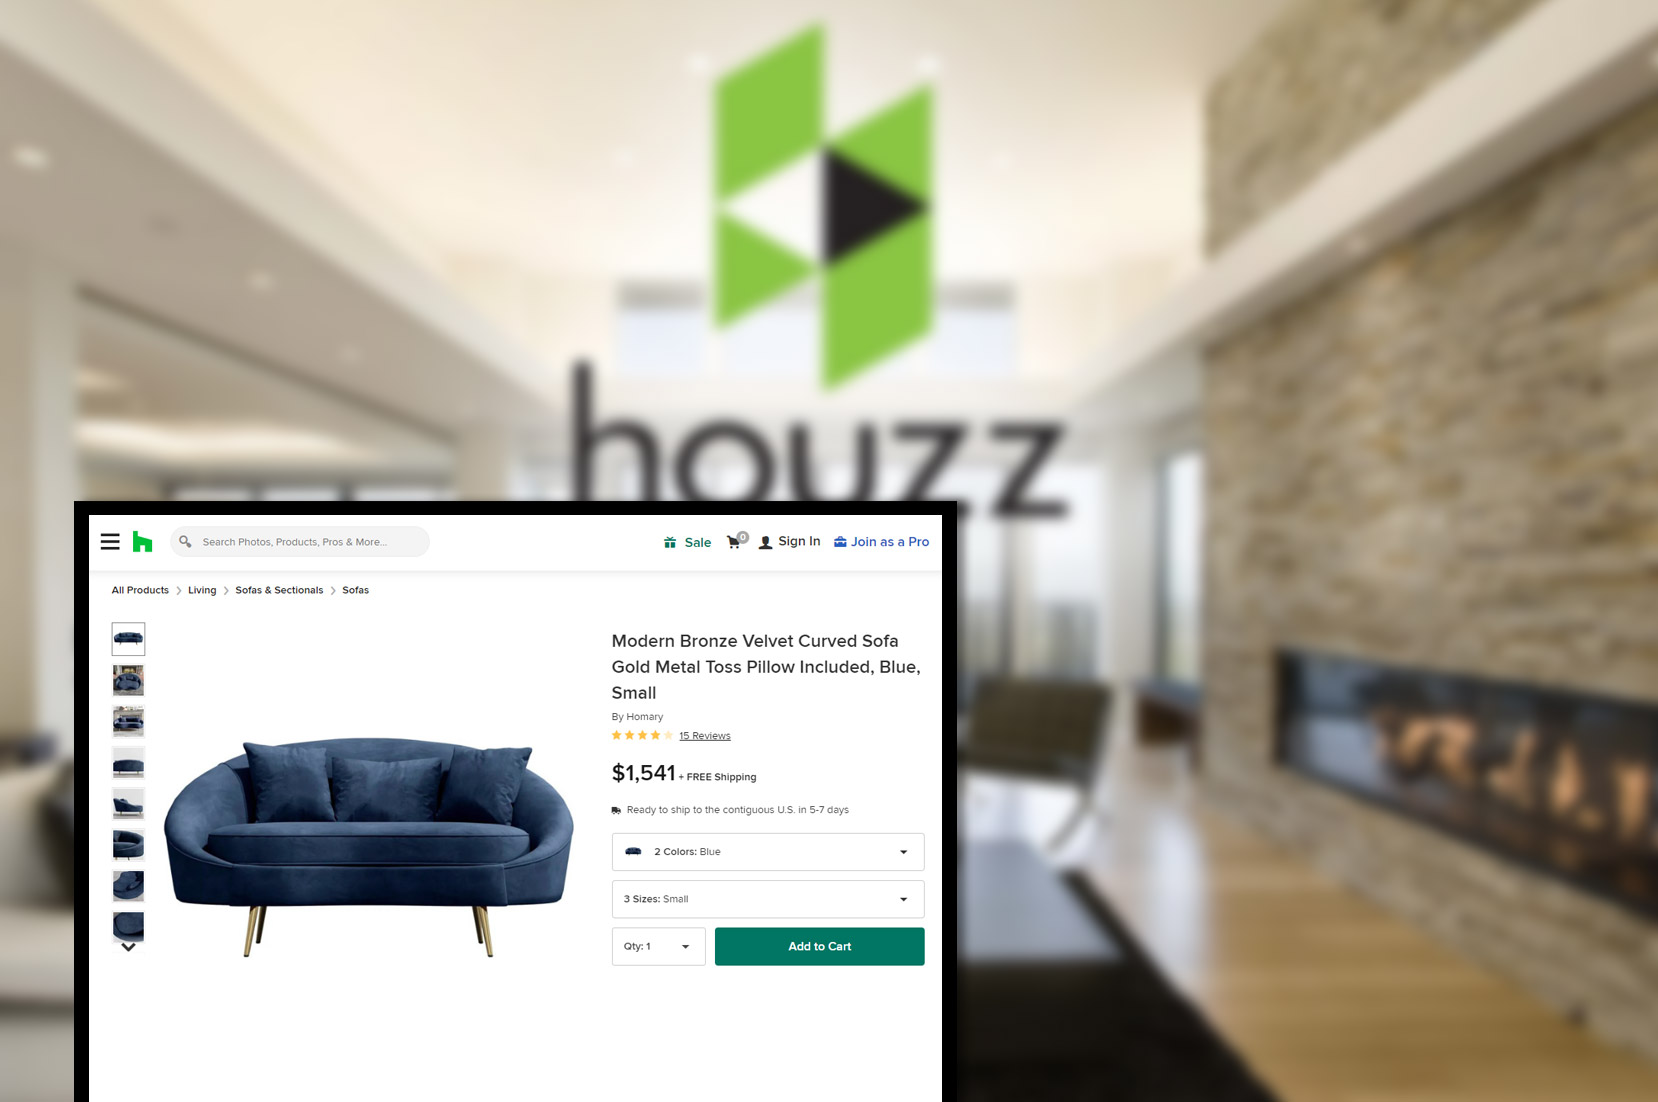 houzz-comproduct-pricing-information-and-image-scraping-services